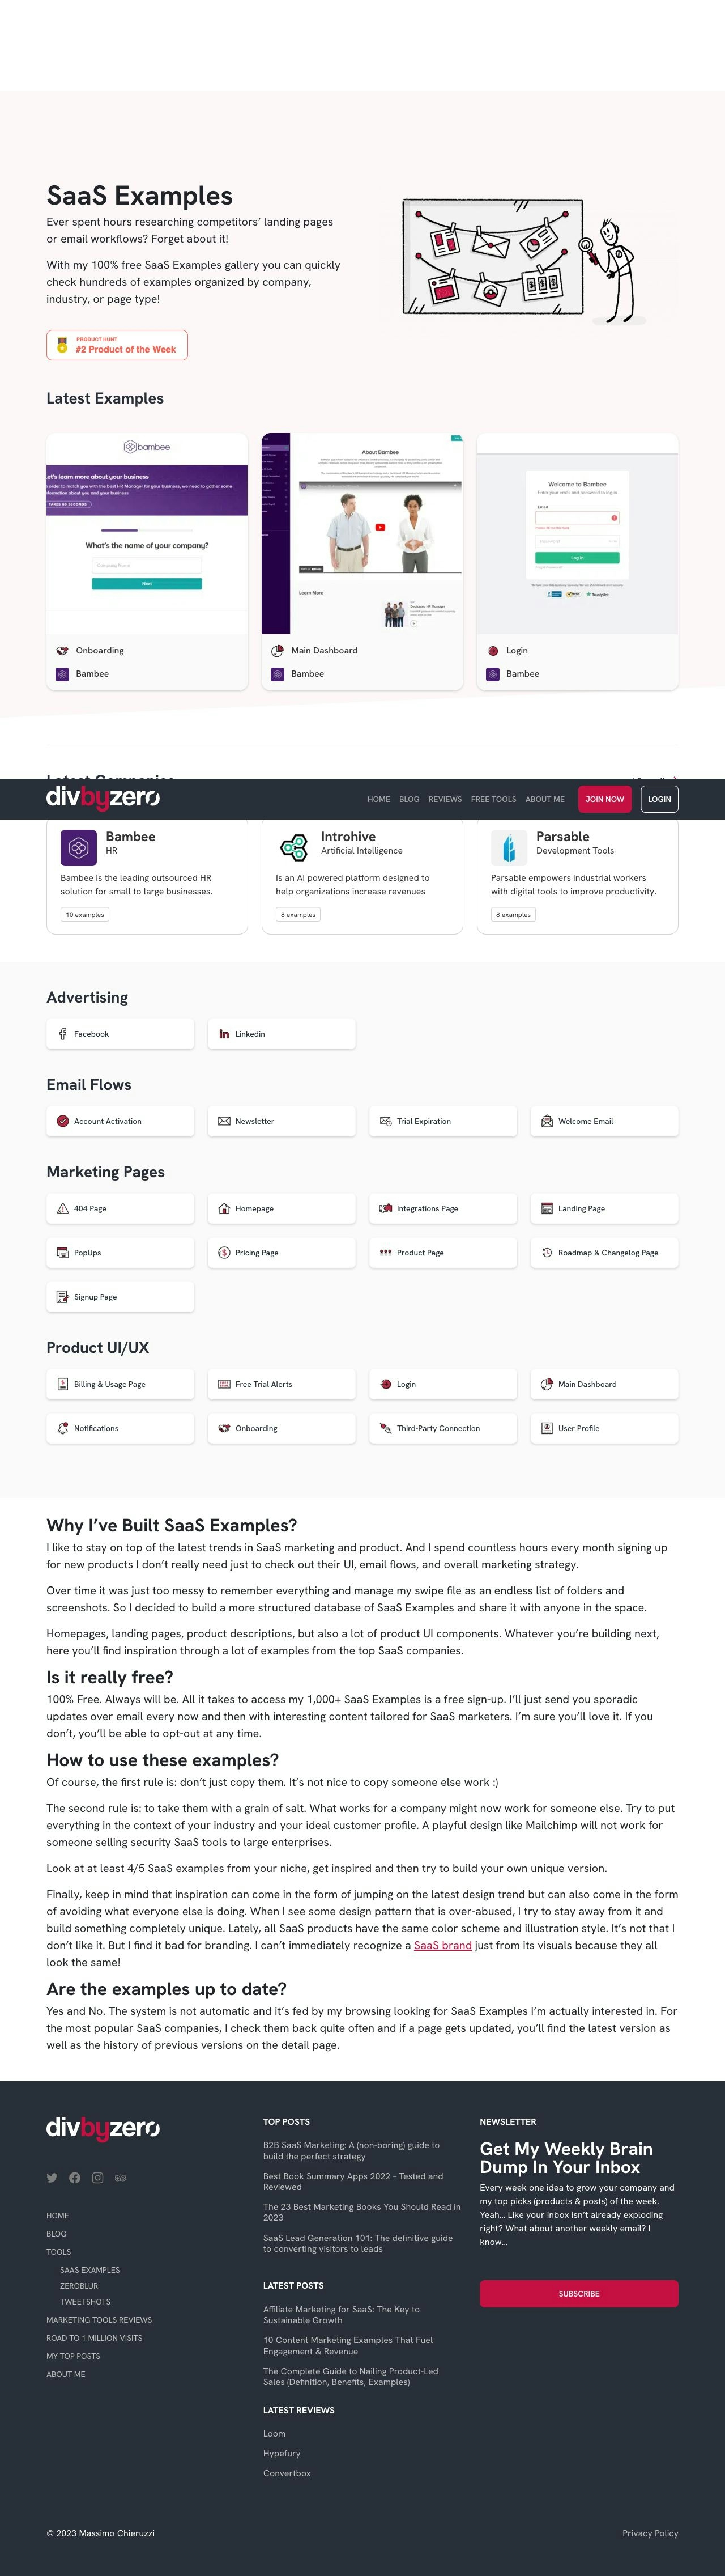 Best SaaS Examples gallery to get inspired! 1,000+ examples landing page design